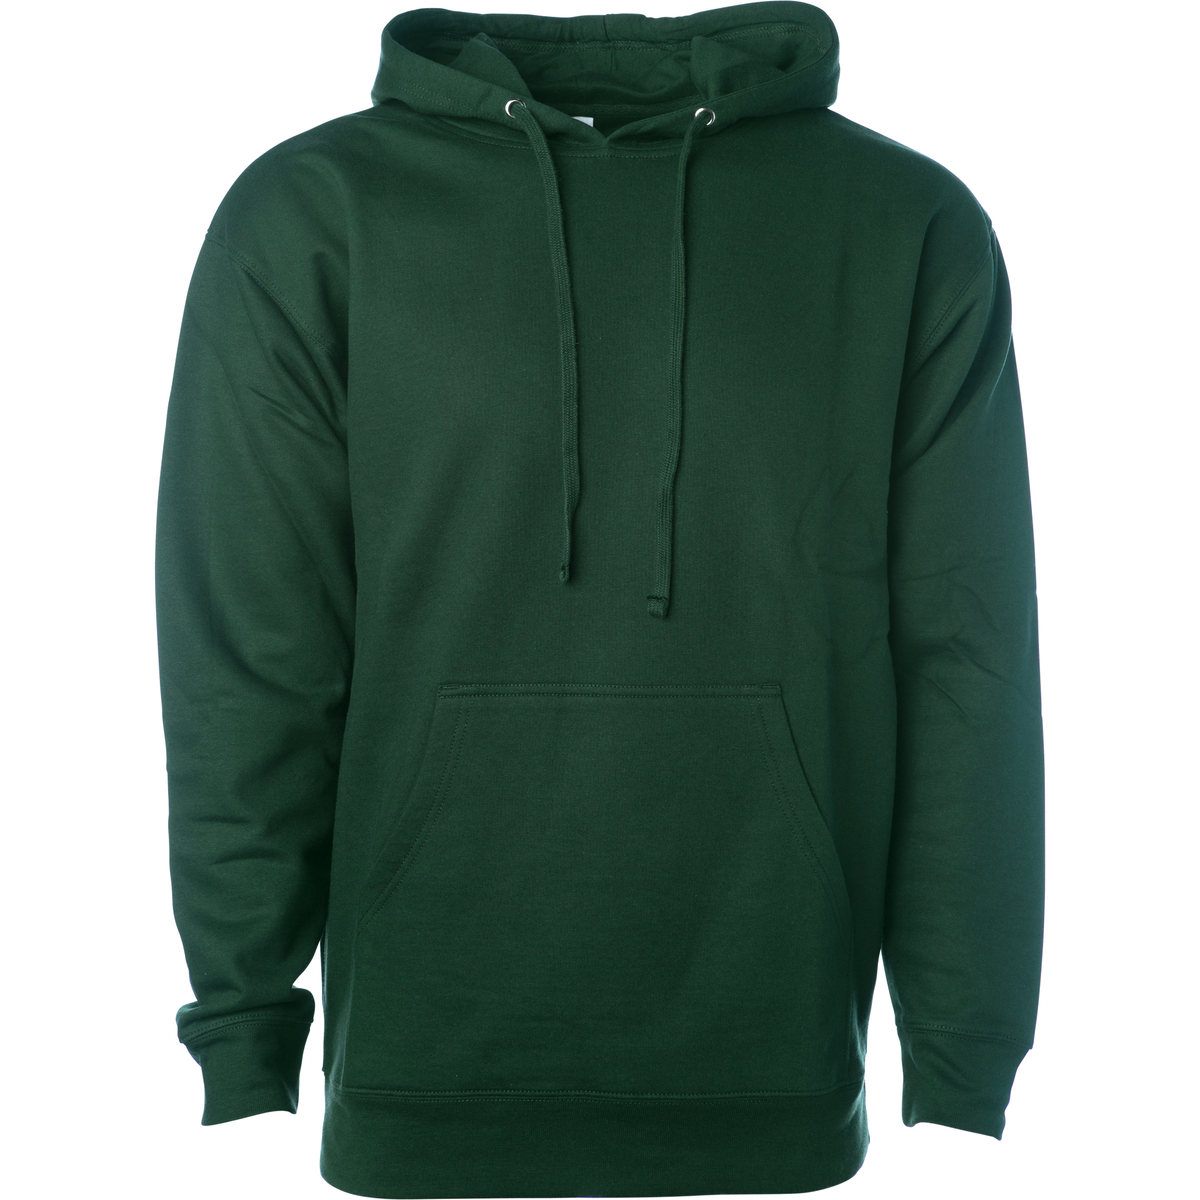 SS4500 #2 - Midweight Hooded Pullover Sweatshirt